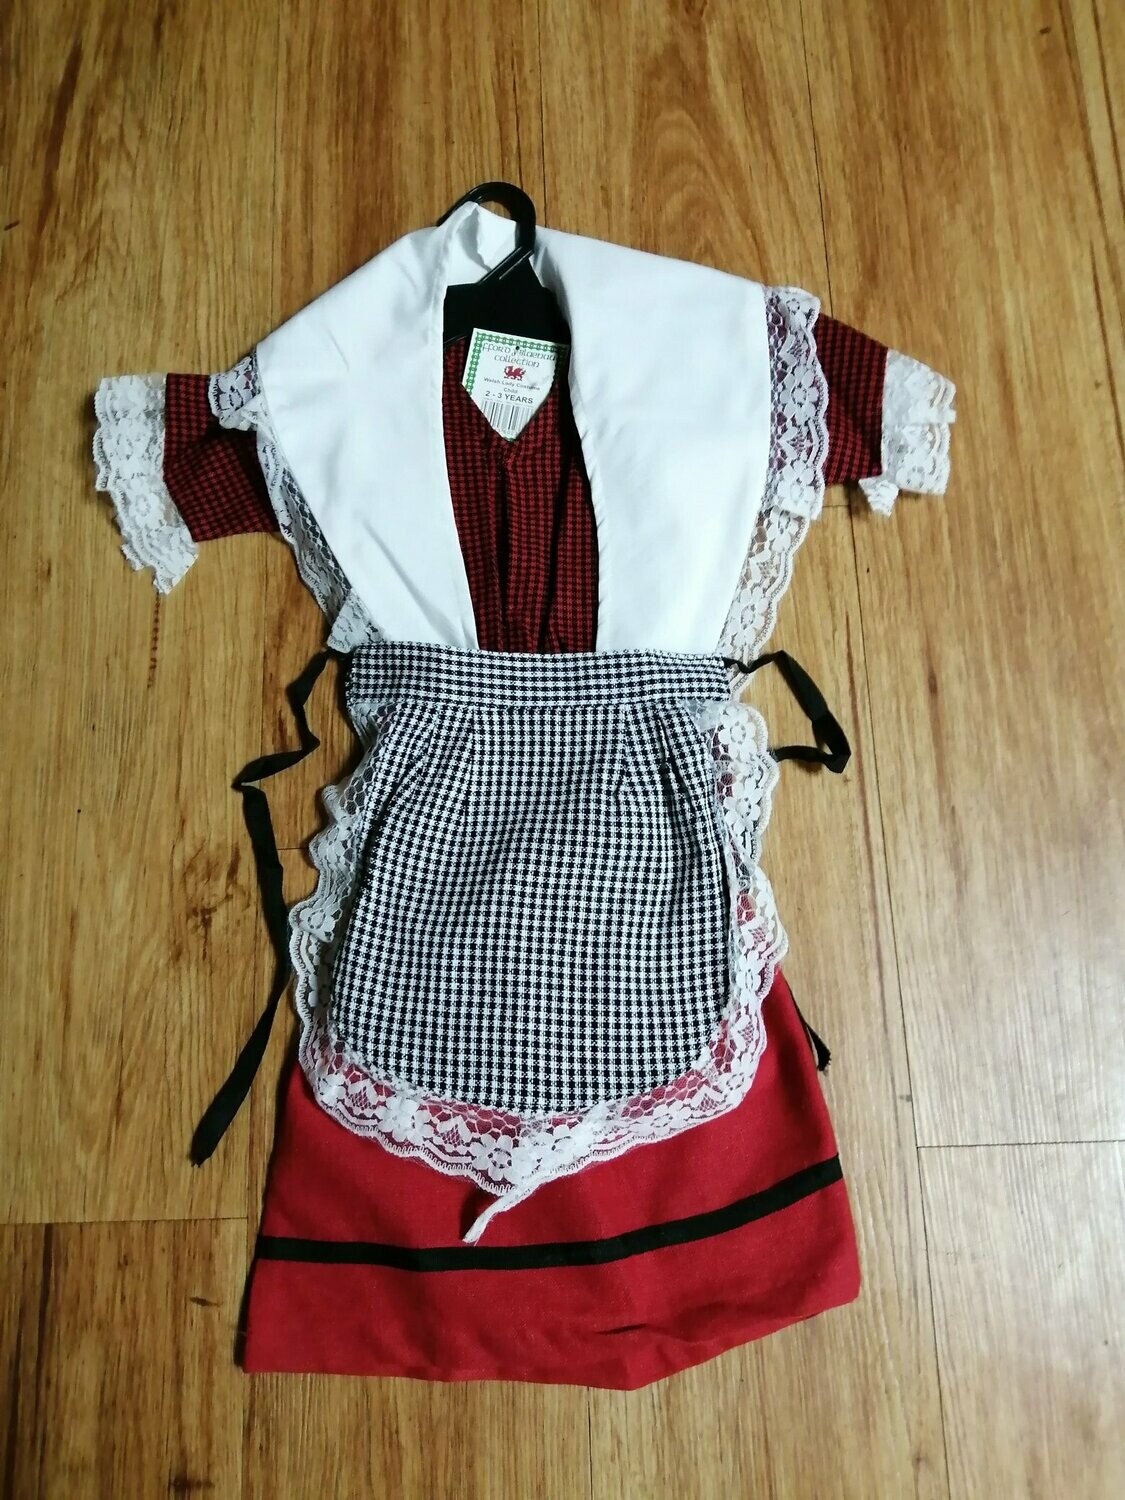 Welsh Costume (Style #2) Up to 5 years, Size: 6-12 Months